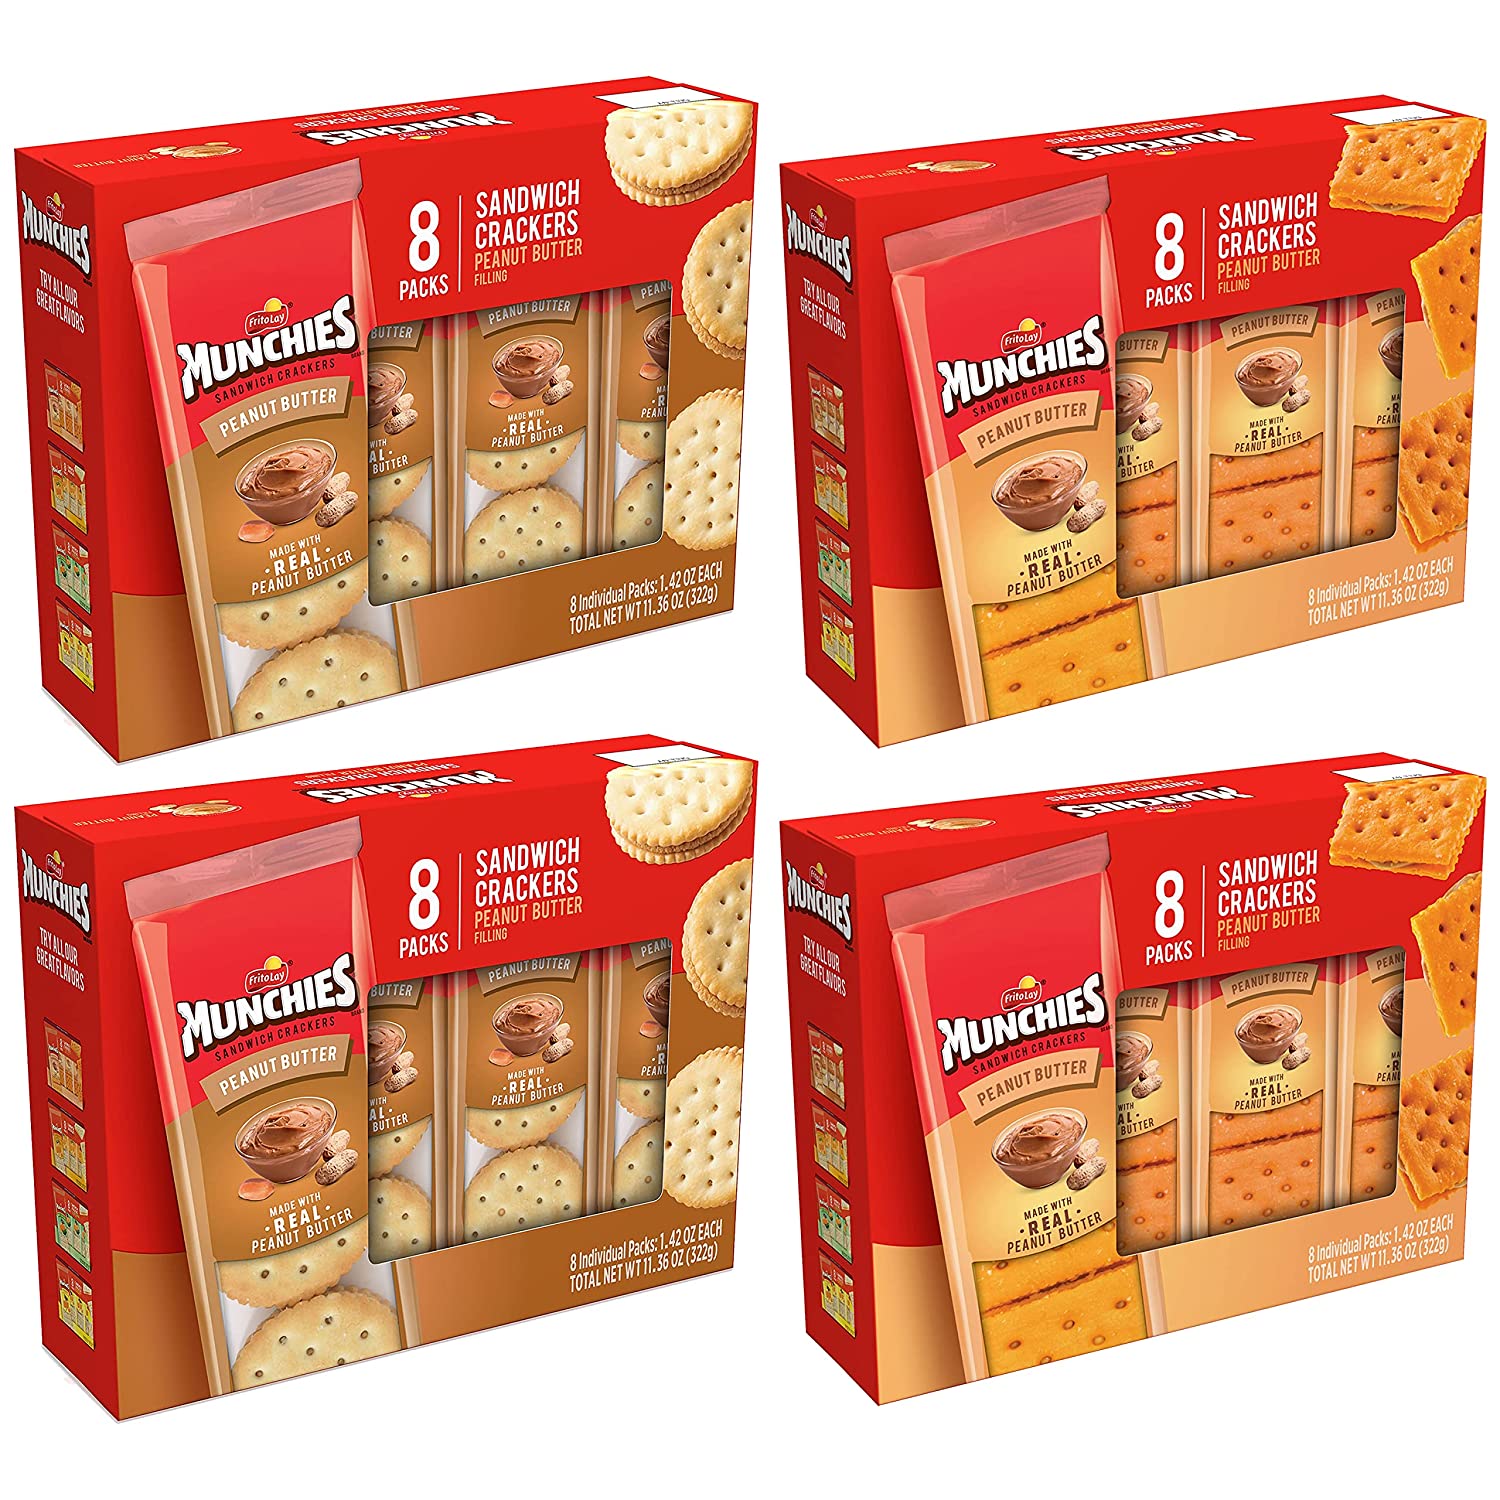 32-Pack 1.42-Oz Munchies Sandwich Crackers Peanut Butter Variety Pack $10.36 w/ S&S + Free Shipping w/ Prime or on $25+